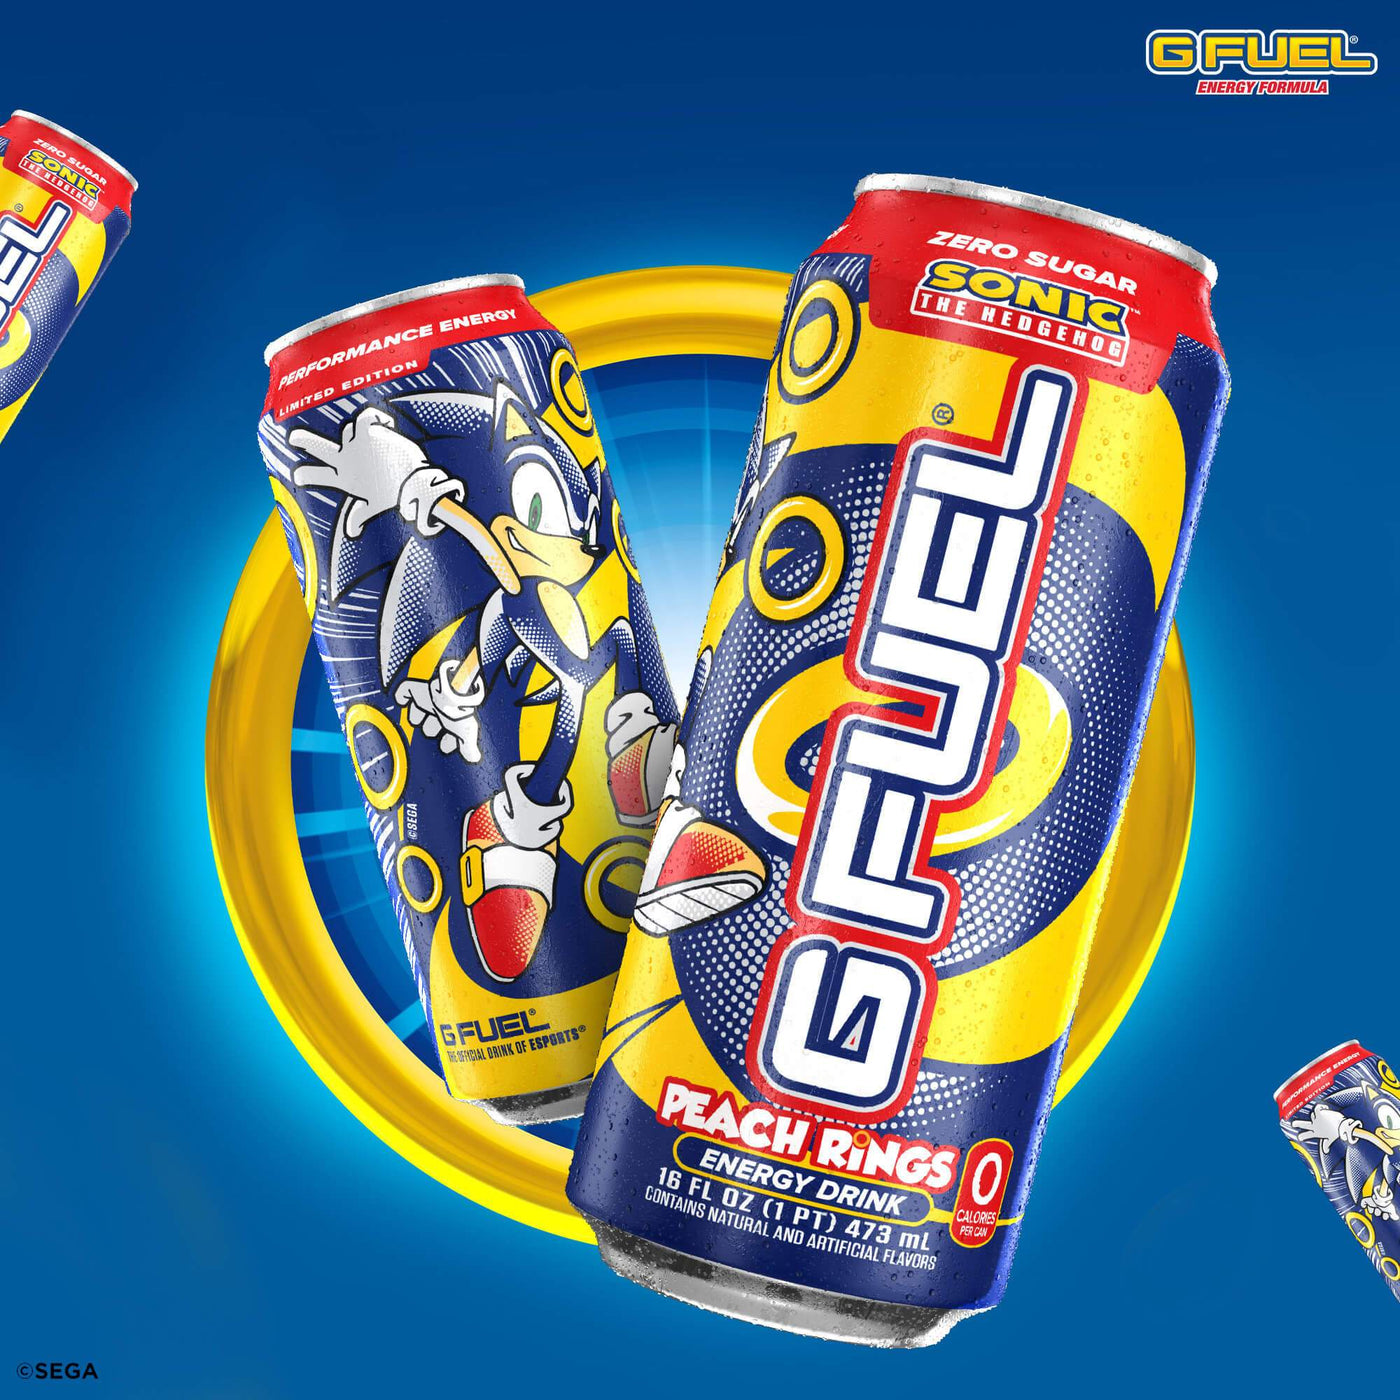 Sonic the Hedgehog Peach Rings G FUEL energy drink cans will be available for sale to U.S customers at gfuel.com on August 12, 2020.